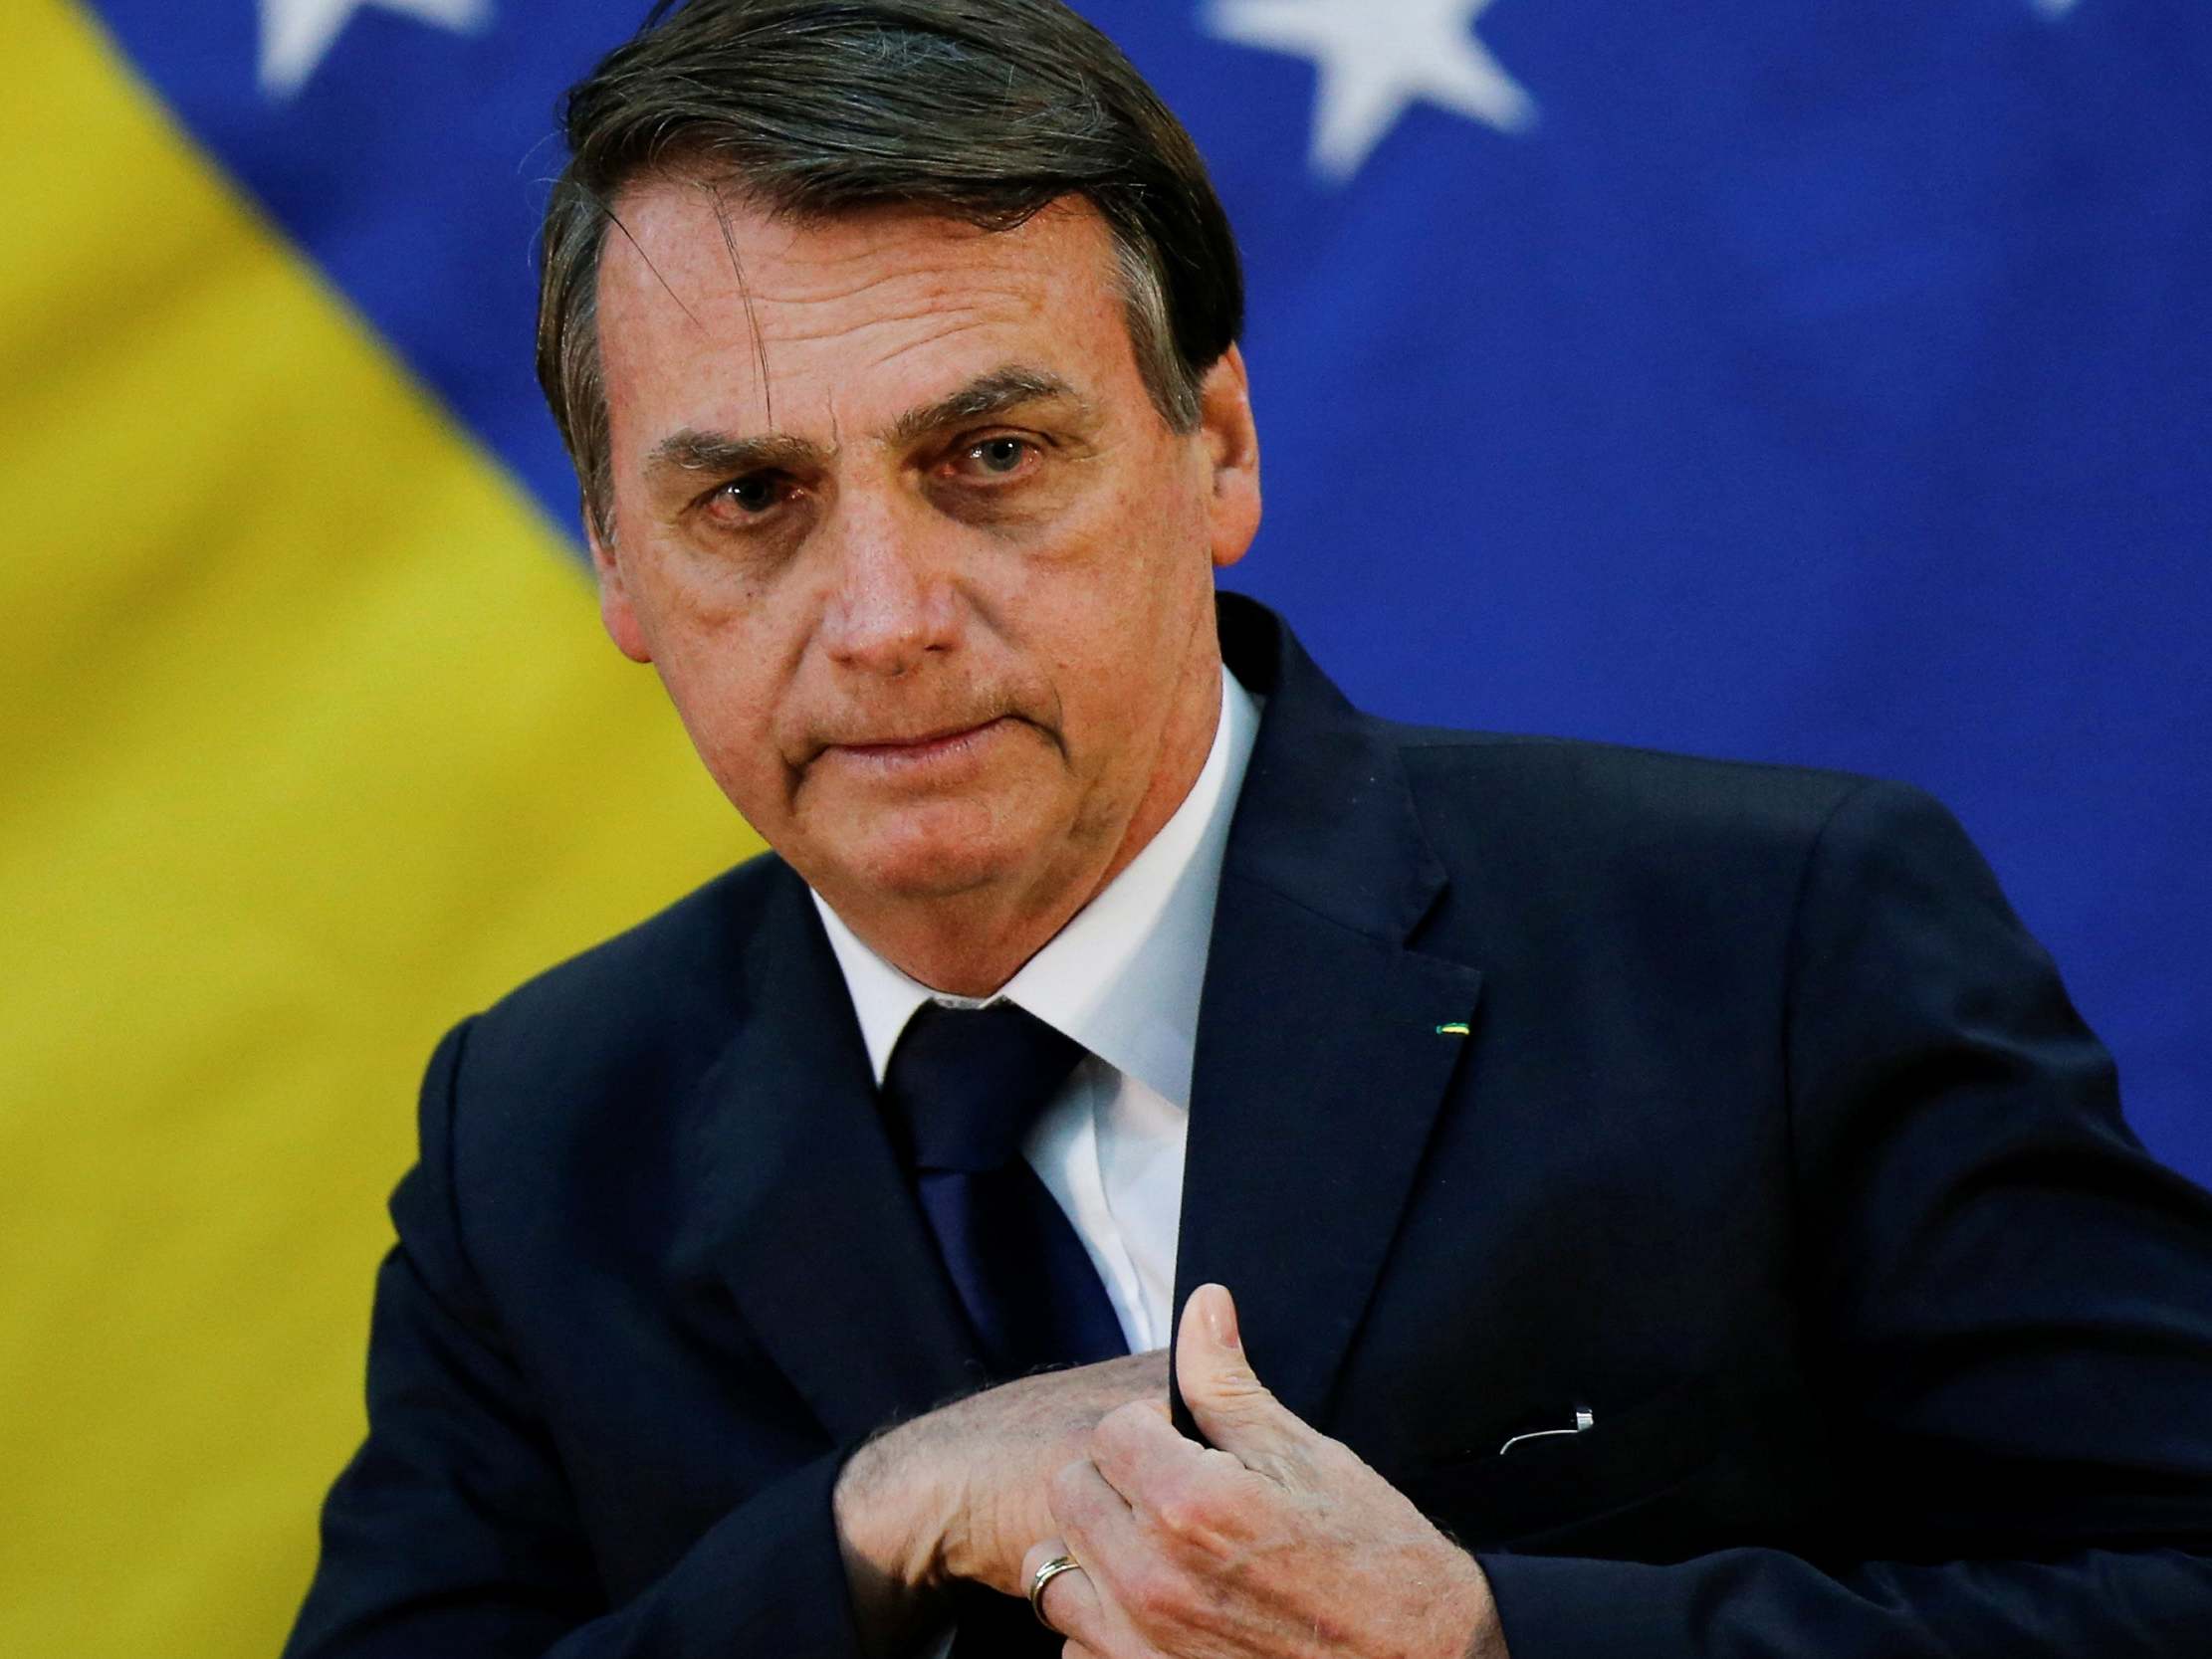 Jair Bolsonaro has suggested he could pull the South American nation out of the Paris Agreement